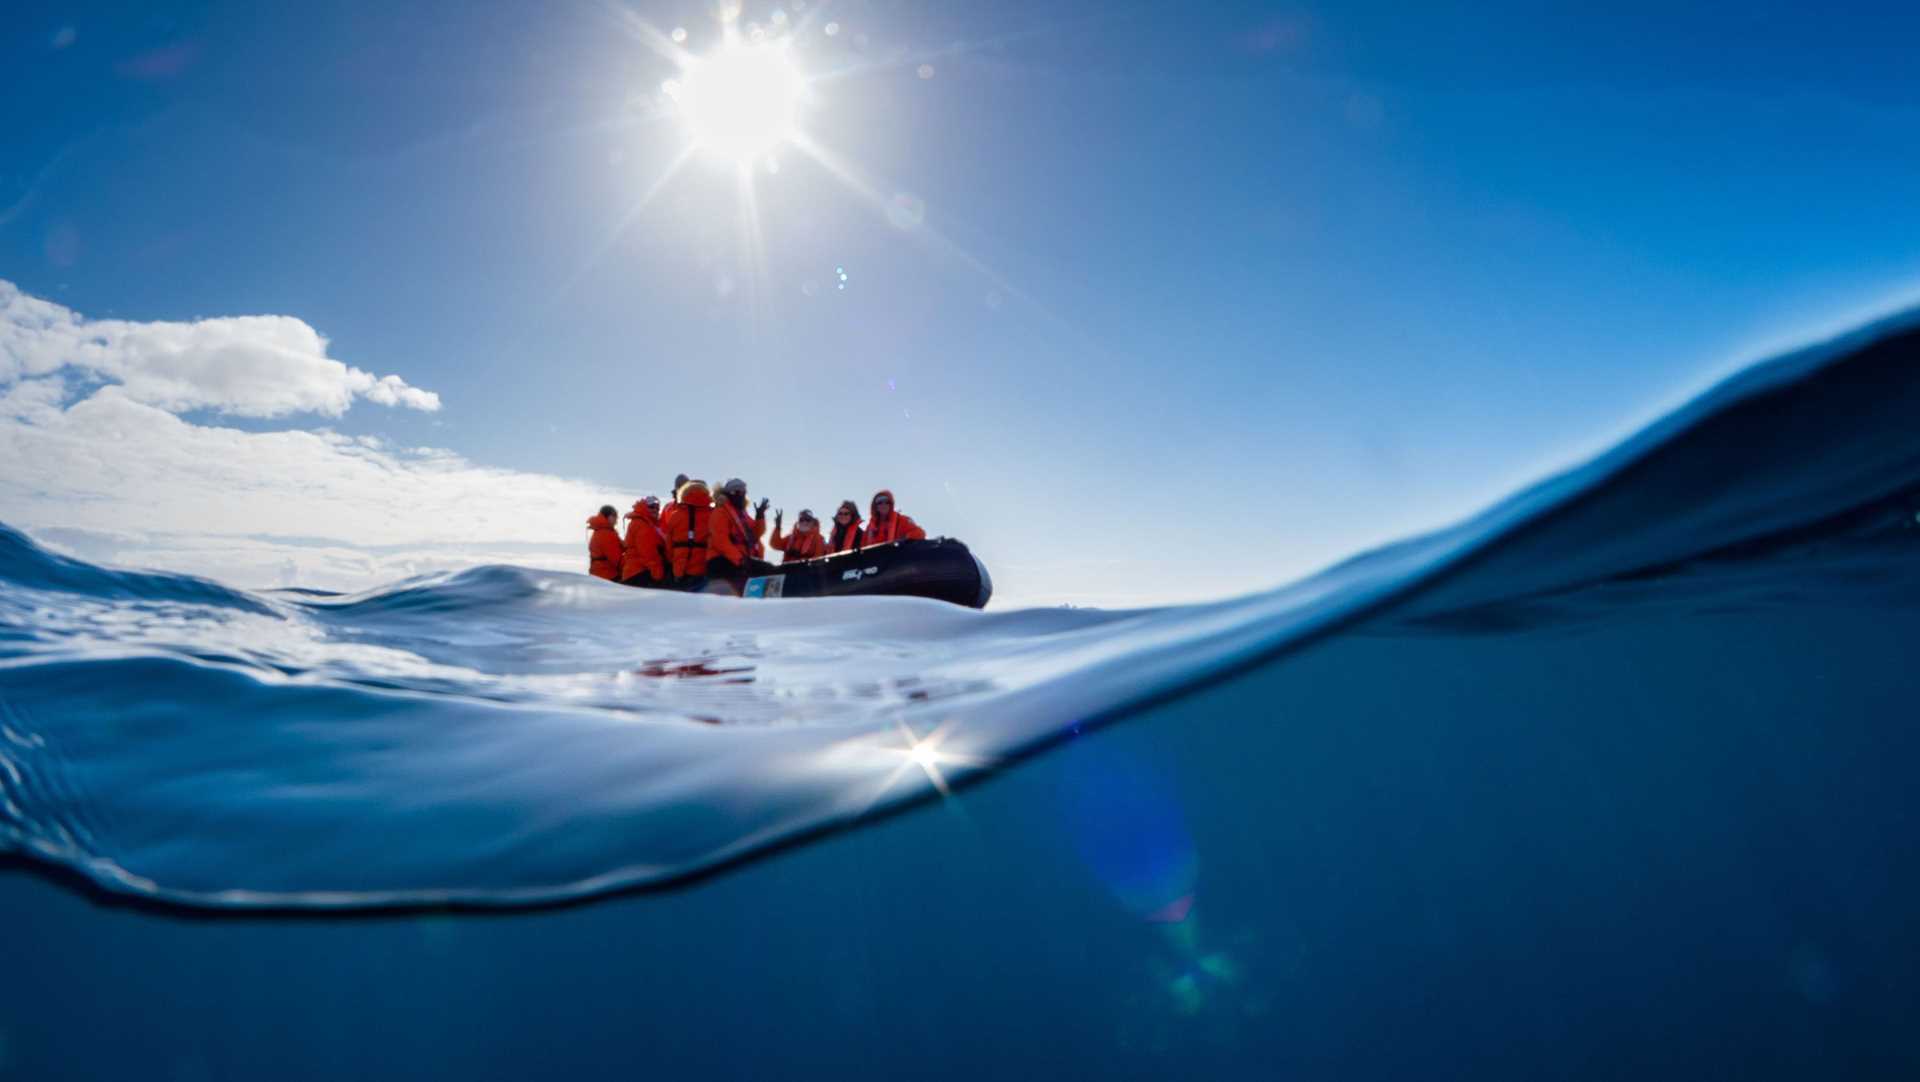 people in a zodiac, shot from underneath the water's surface